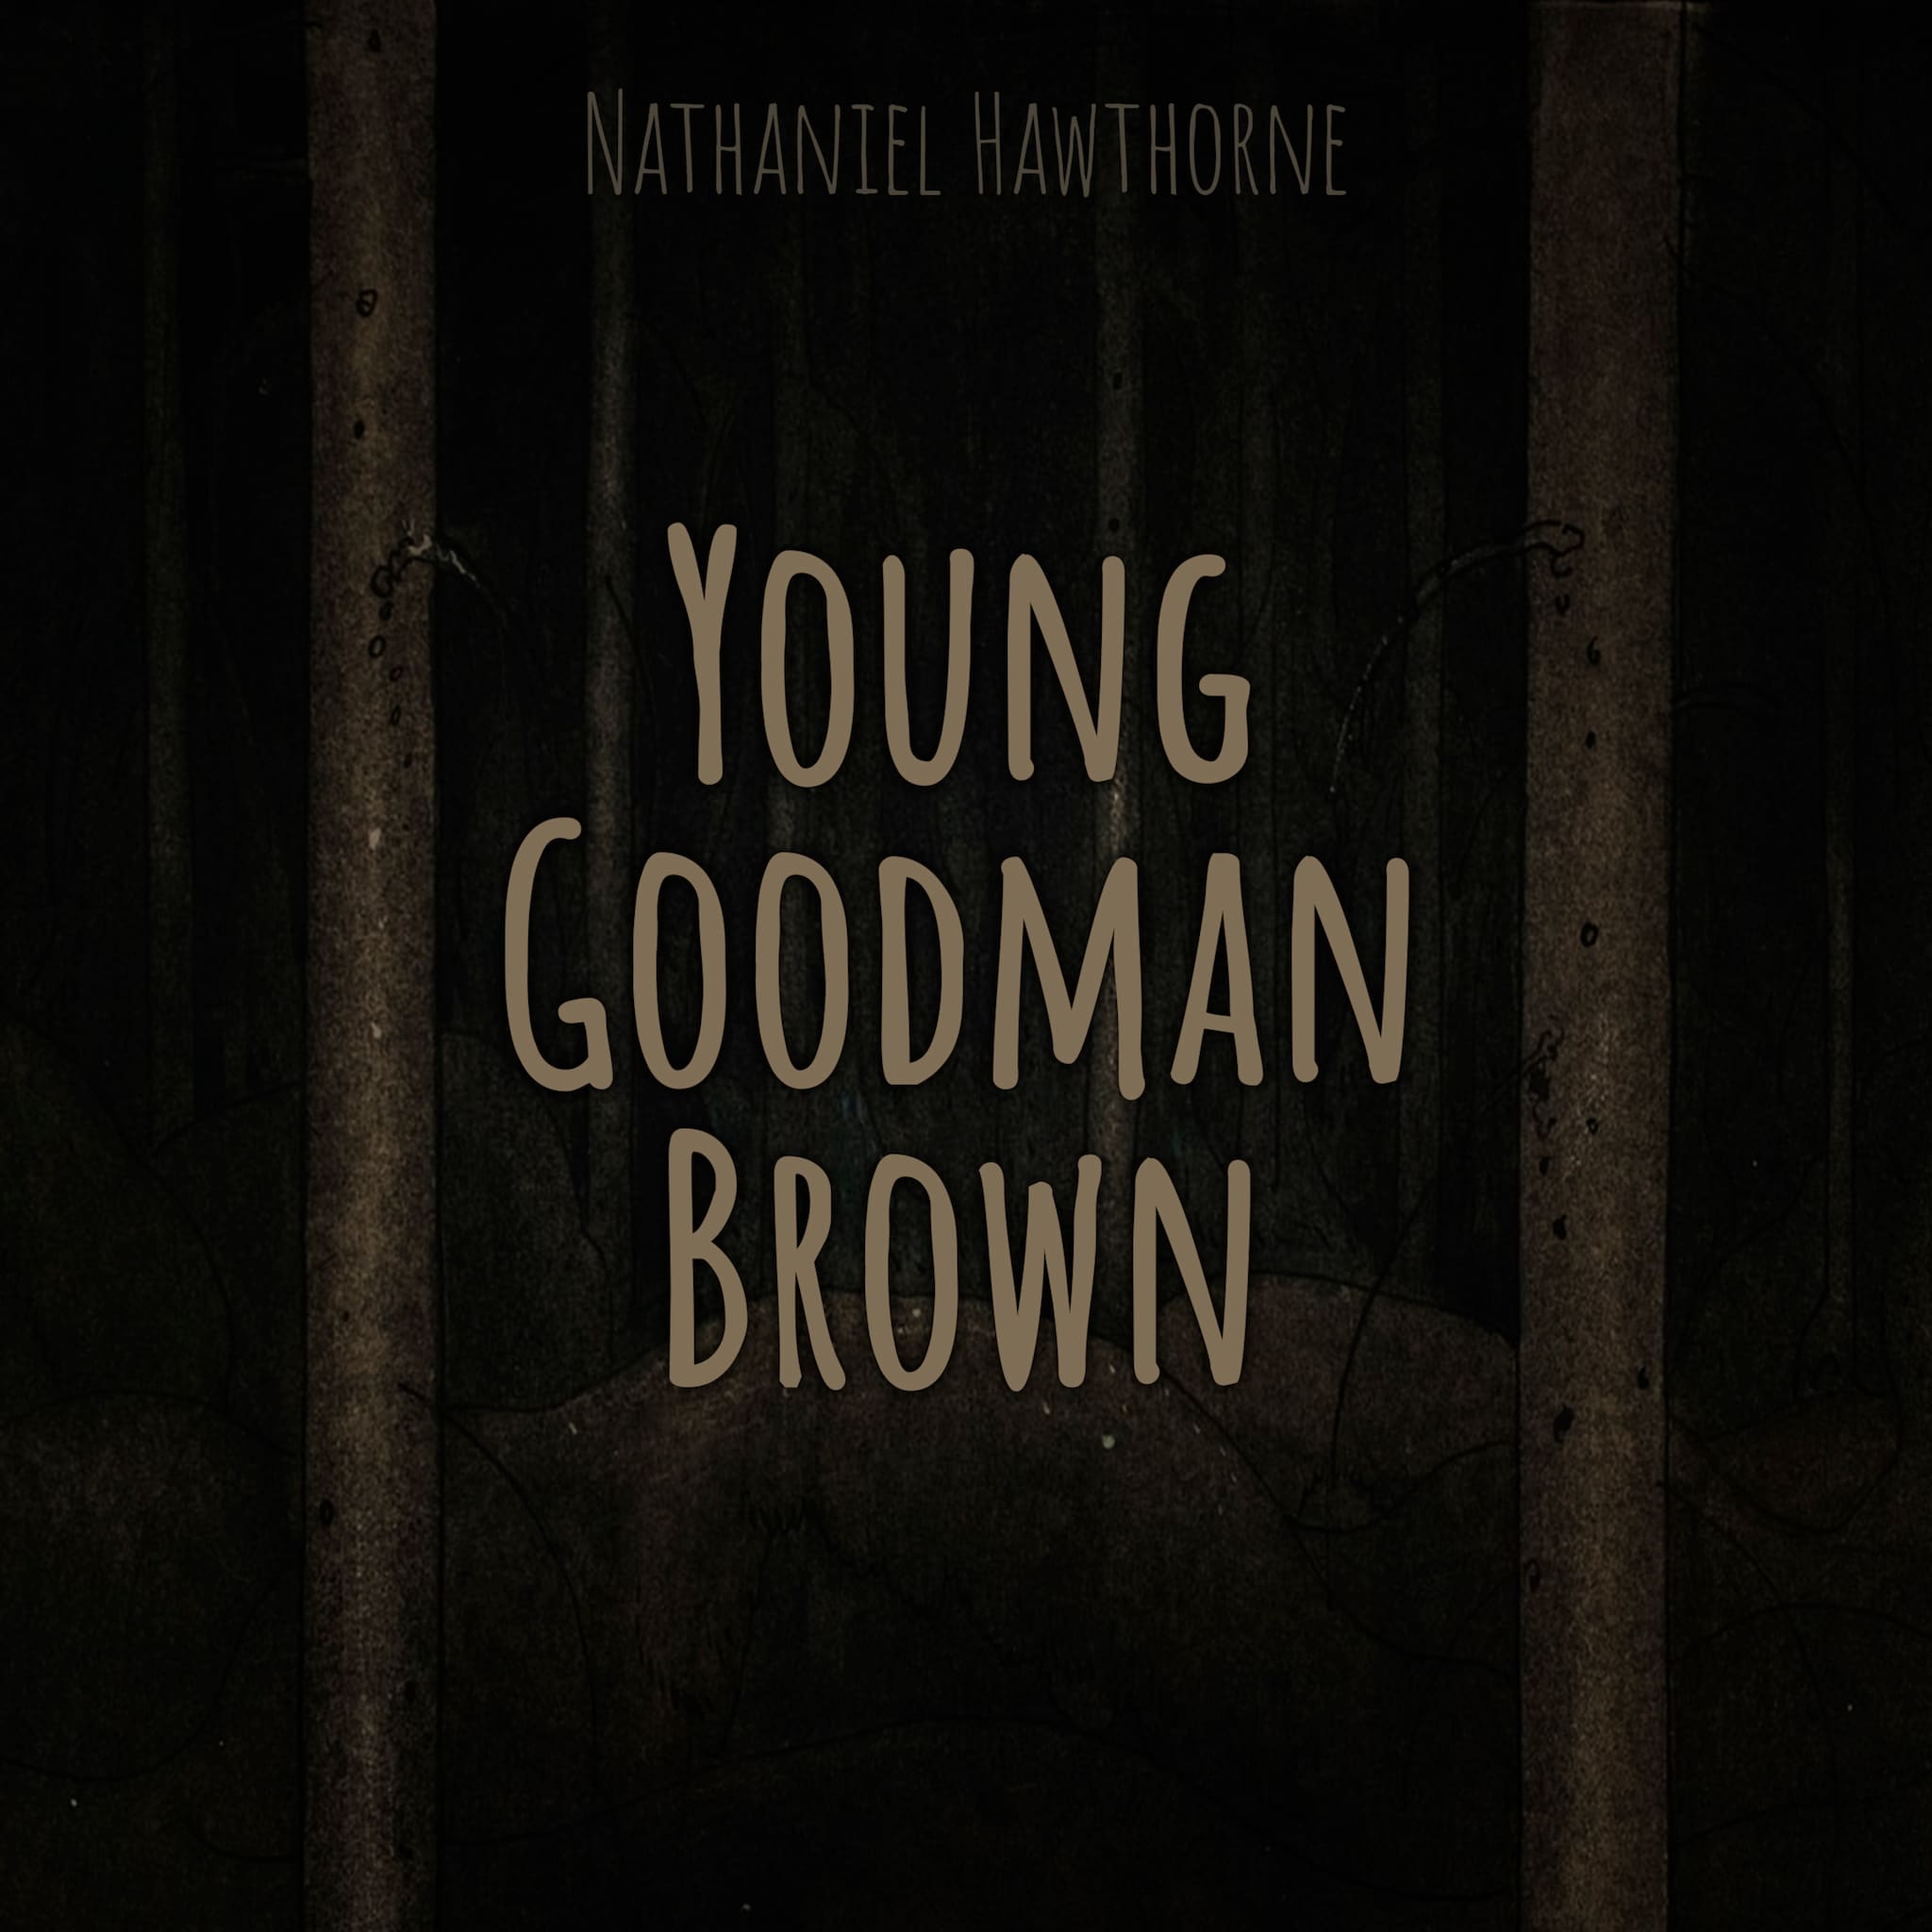 in young goodman brown hawthorne